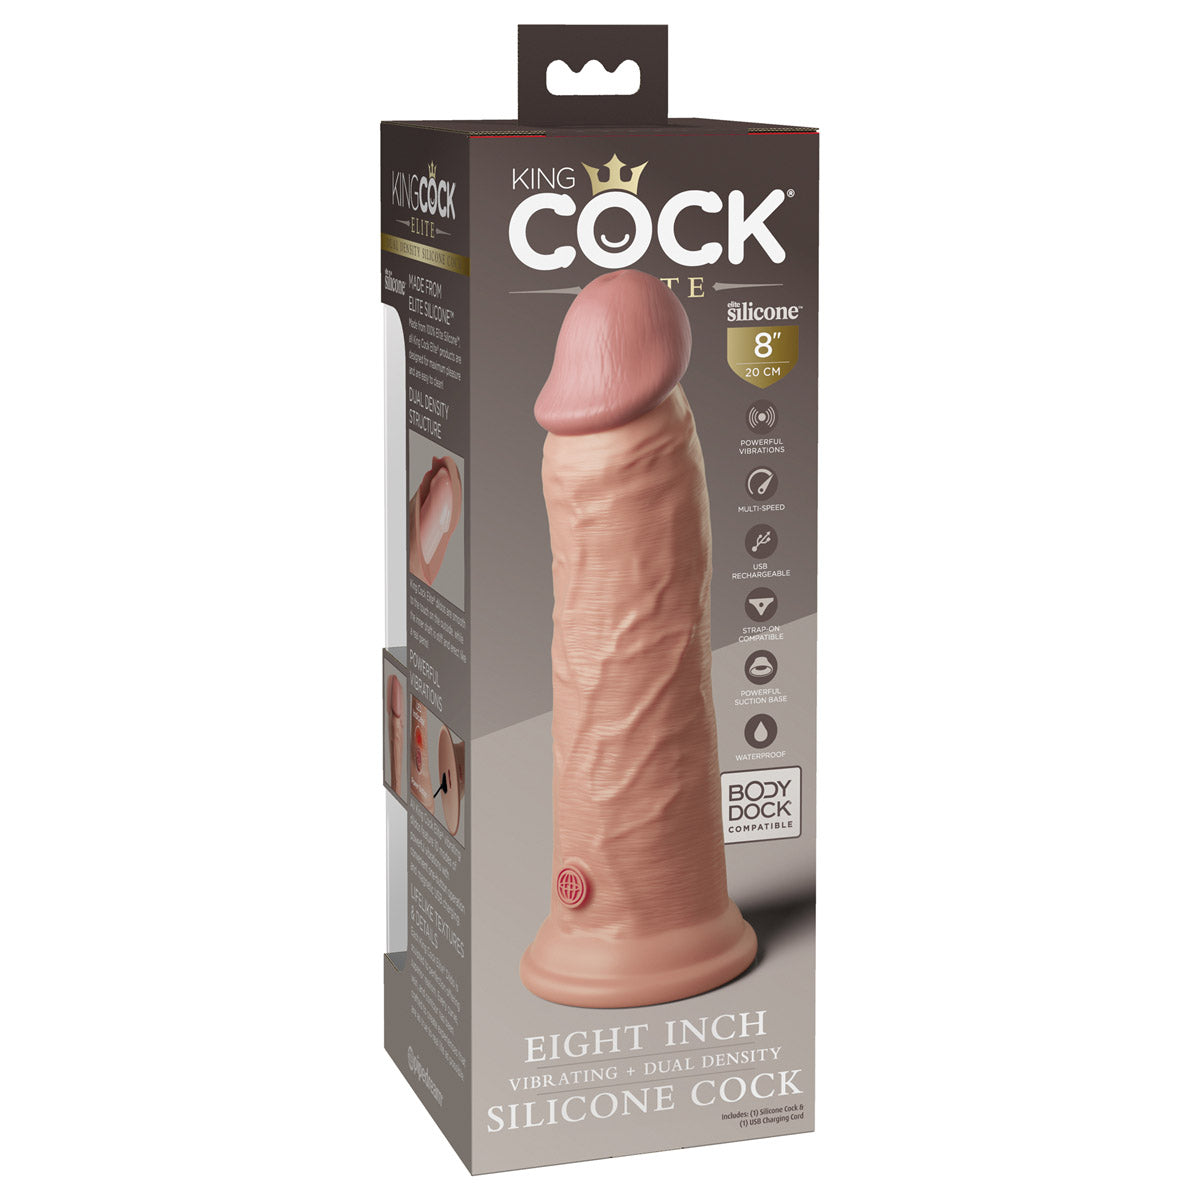 King Cock Elite 8" Dual Density Vibrating Silicone Cock - Light - Thorn & Feather